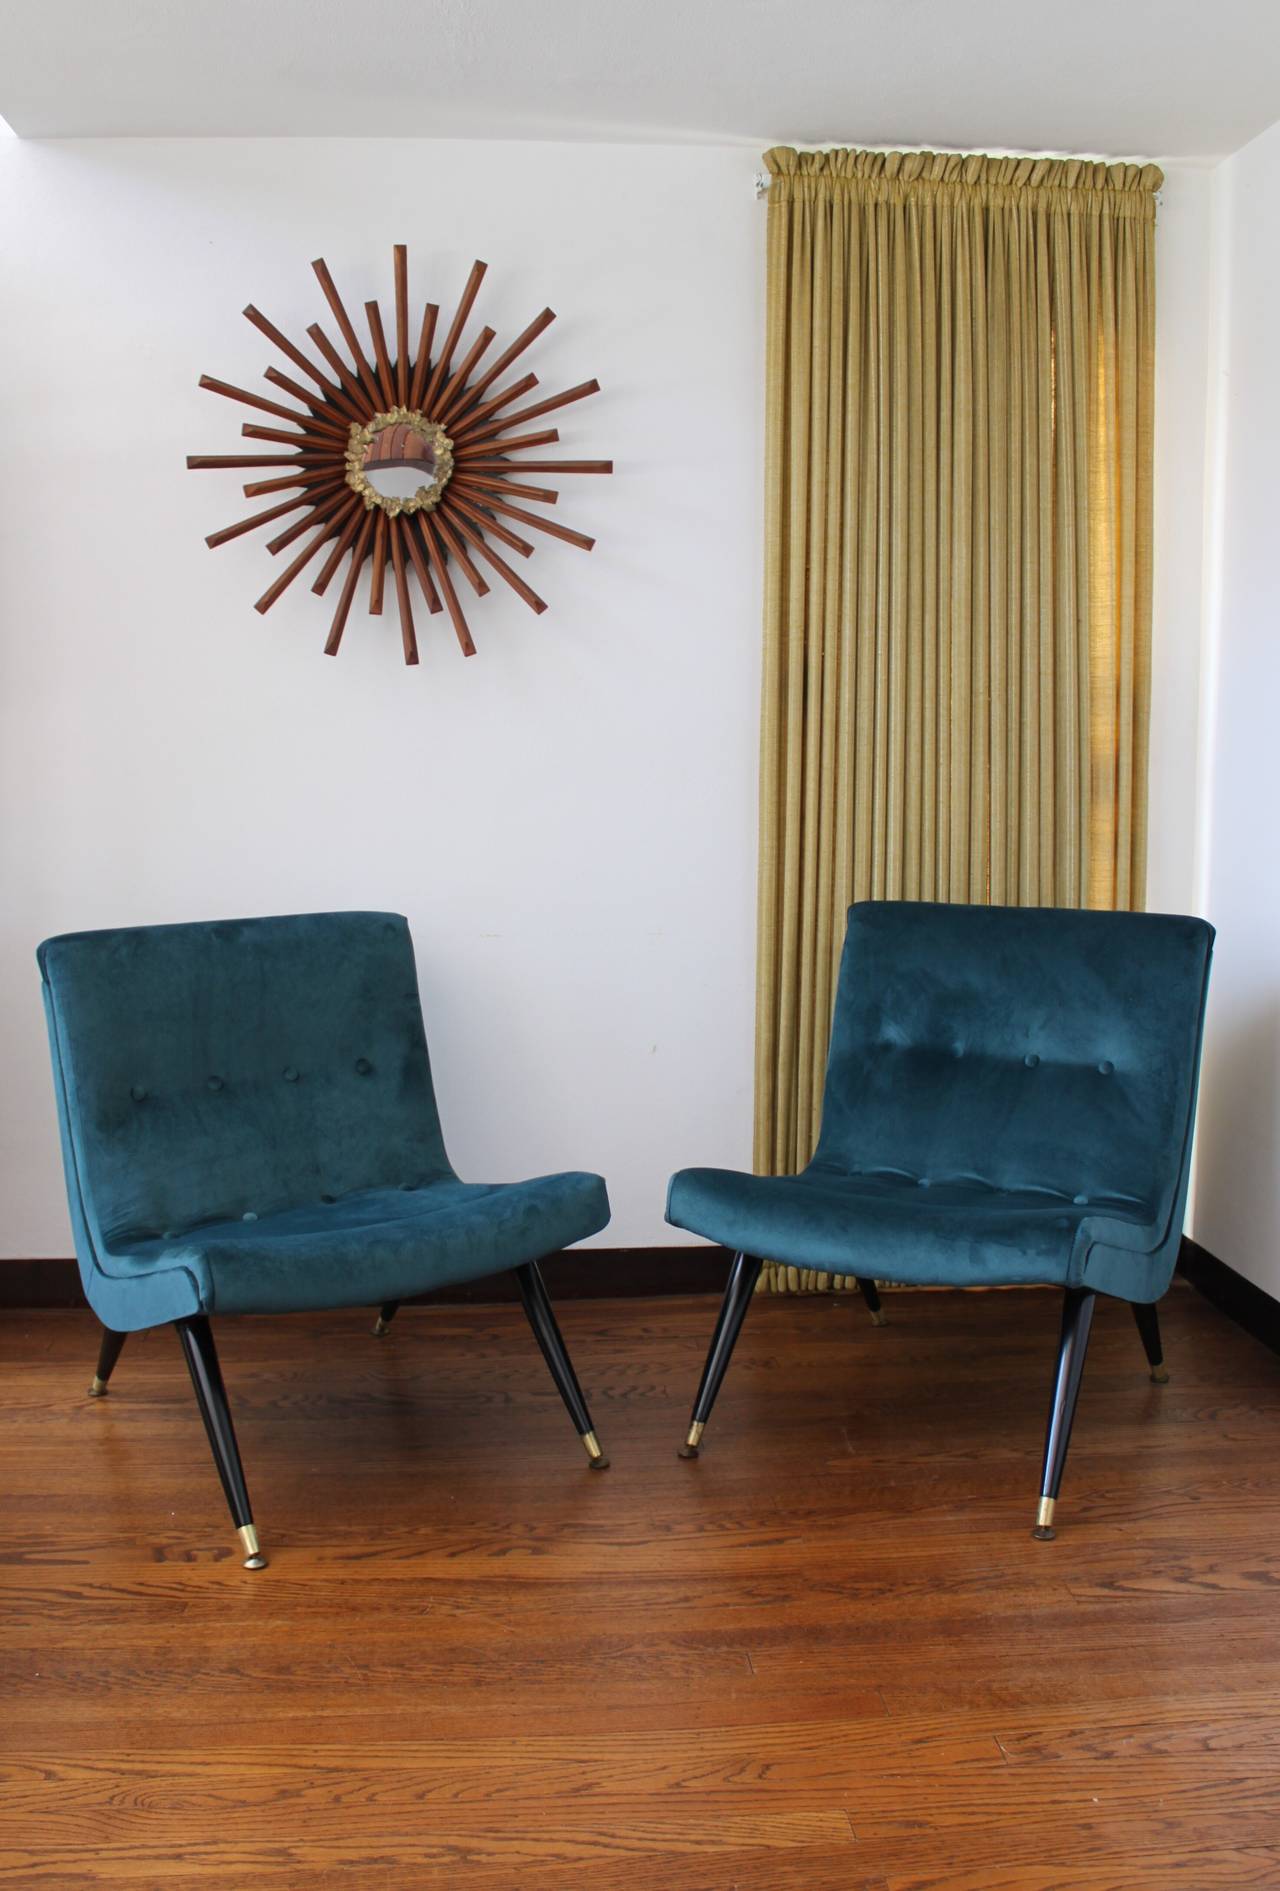 Exquisite scoop lounge chairs in a new buttery peacock velvet by Milo Baughman. Legs are lacquered walnut with brass feet. Fantastic scale and quality.